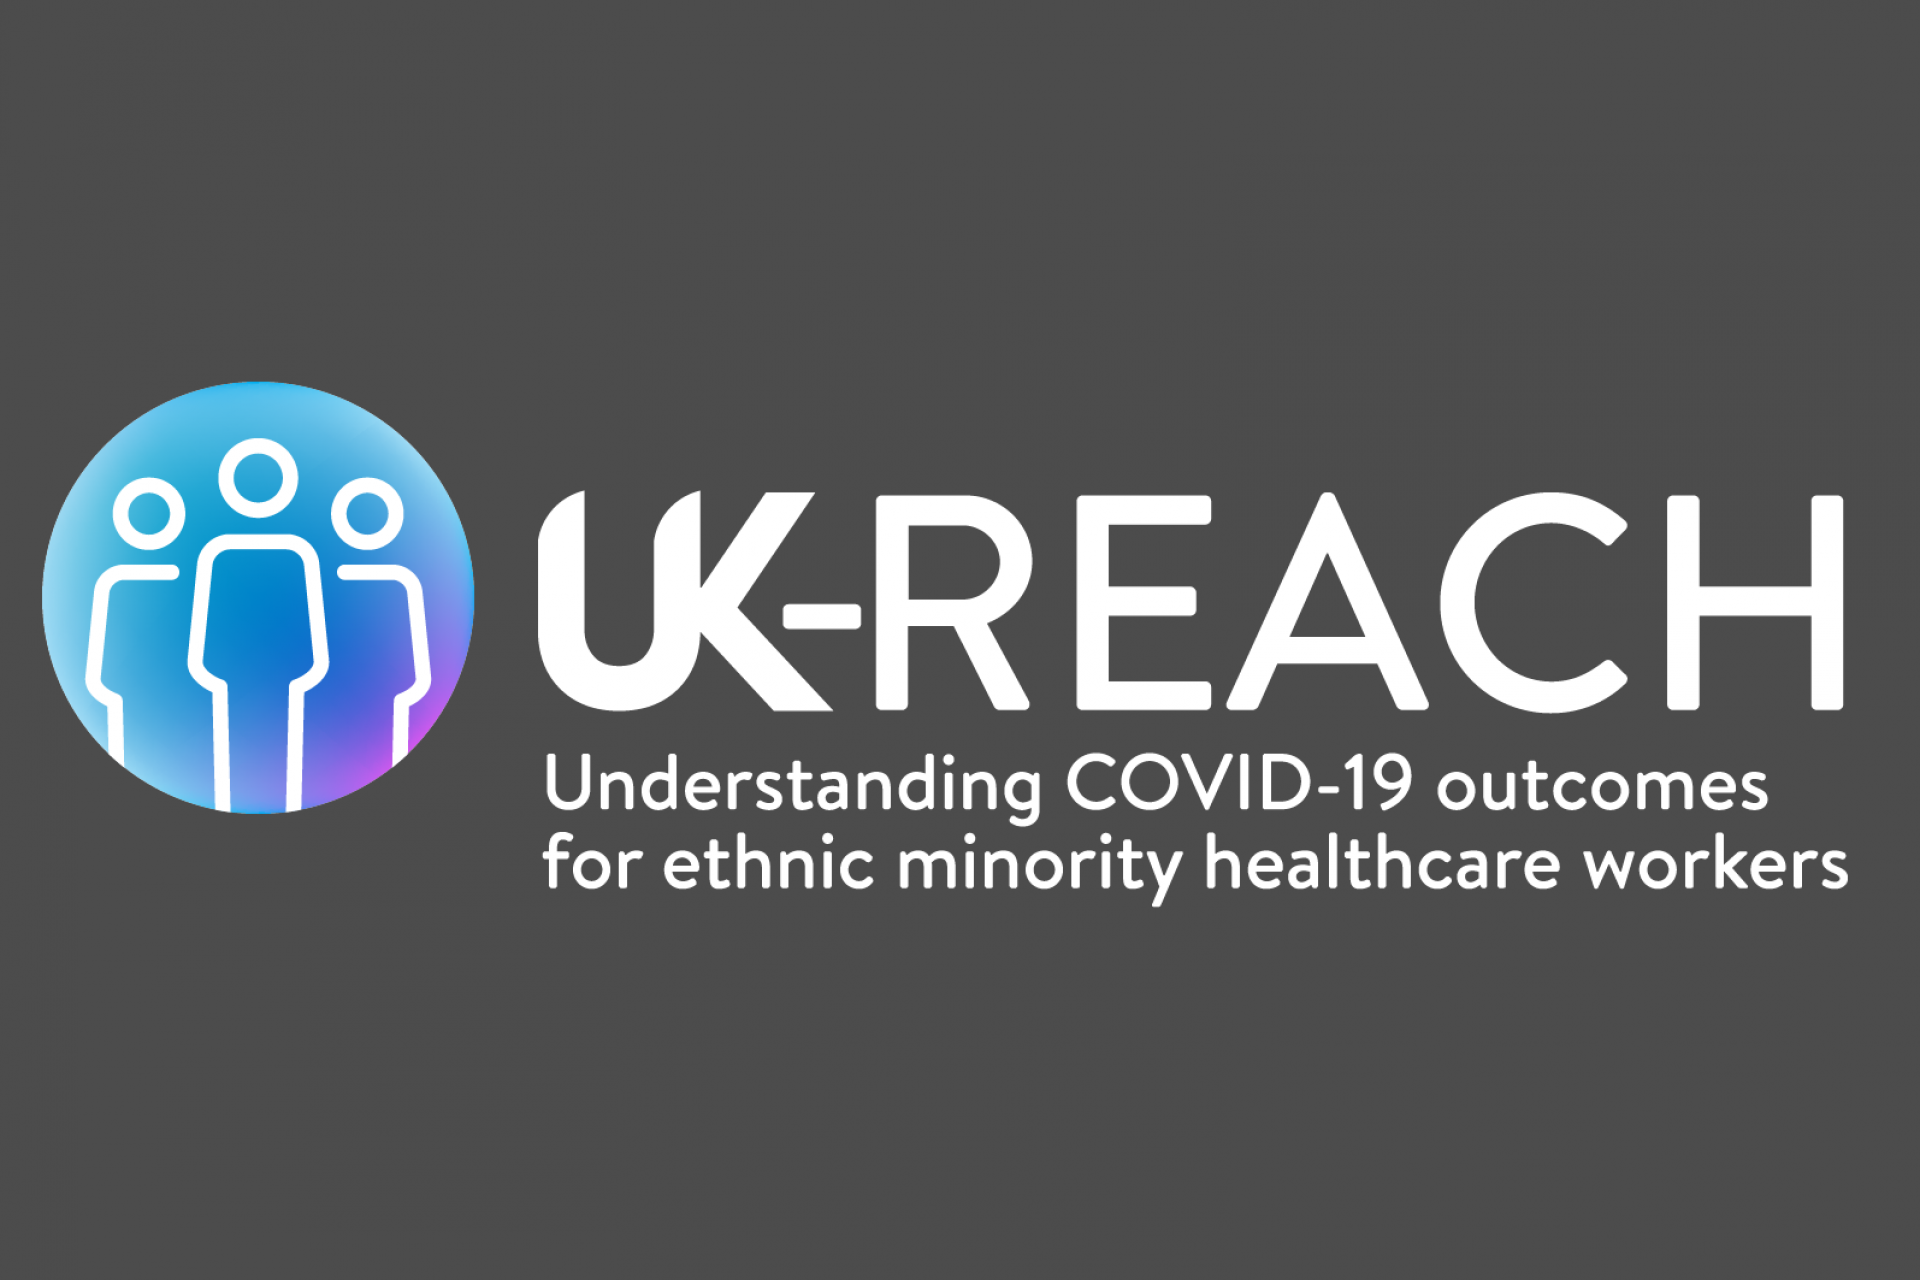 UK-REACH: Understanding COVID-19 outcomes for ethnic minority healthcare workers